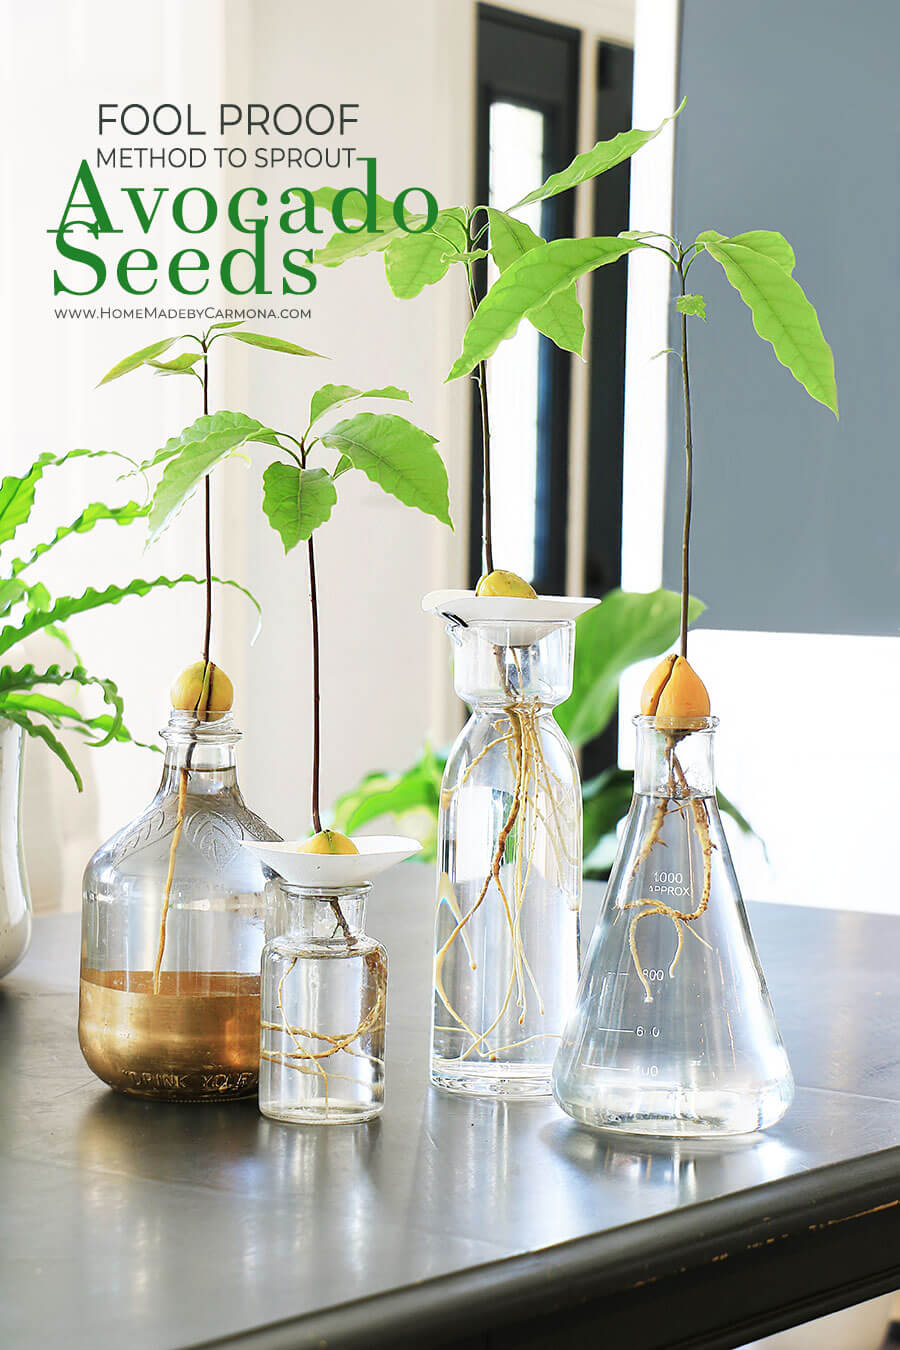 Fool-Proof-Method-to-Sprout-Avocado-Seeds